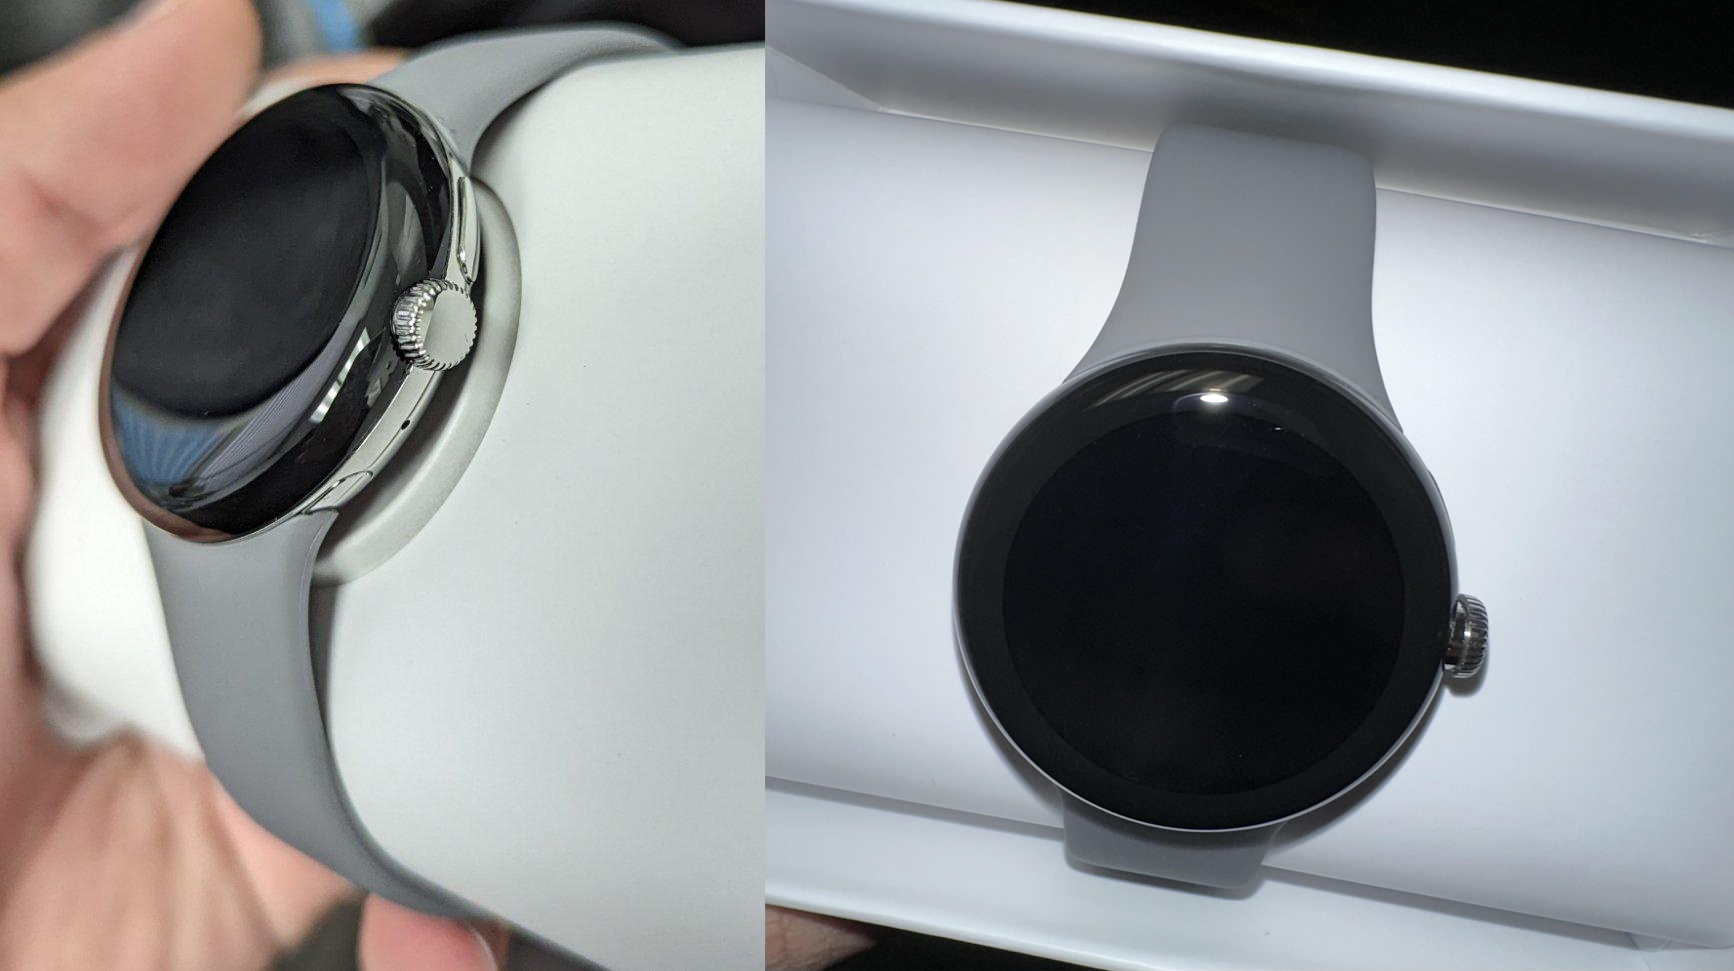 Early Pixel Watch online unboxing leak images